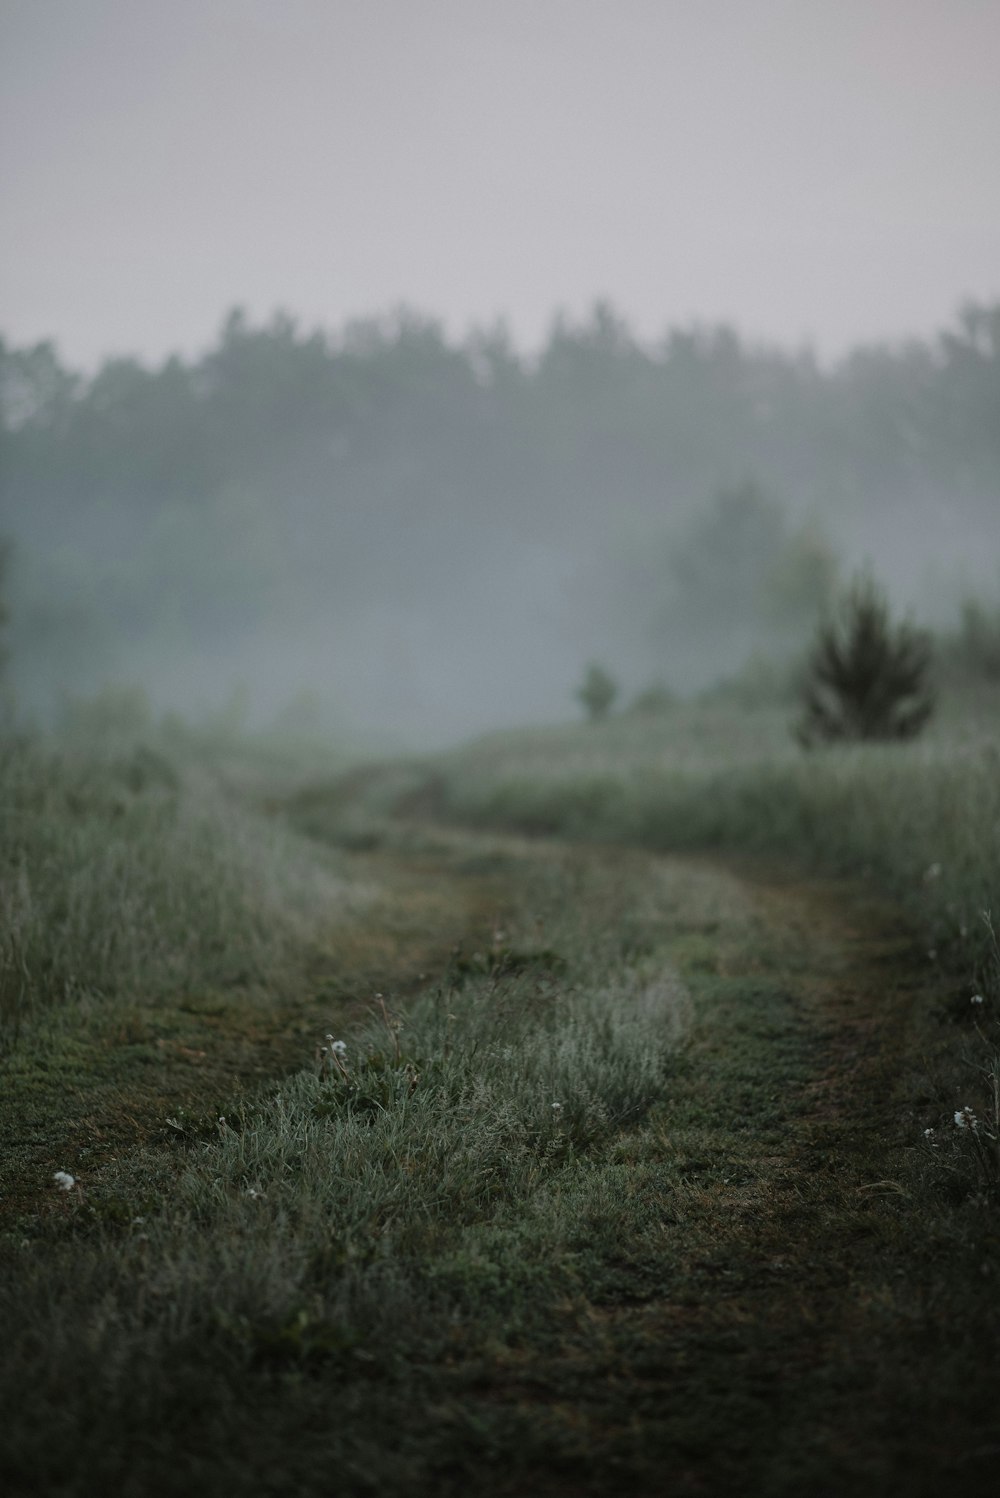 a foggy path in a field with trees in the background